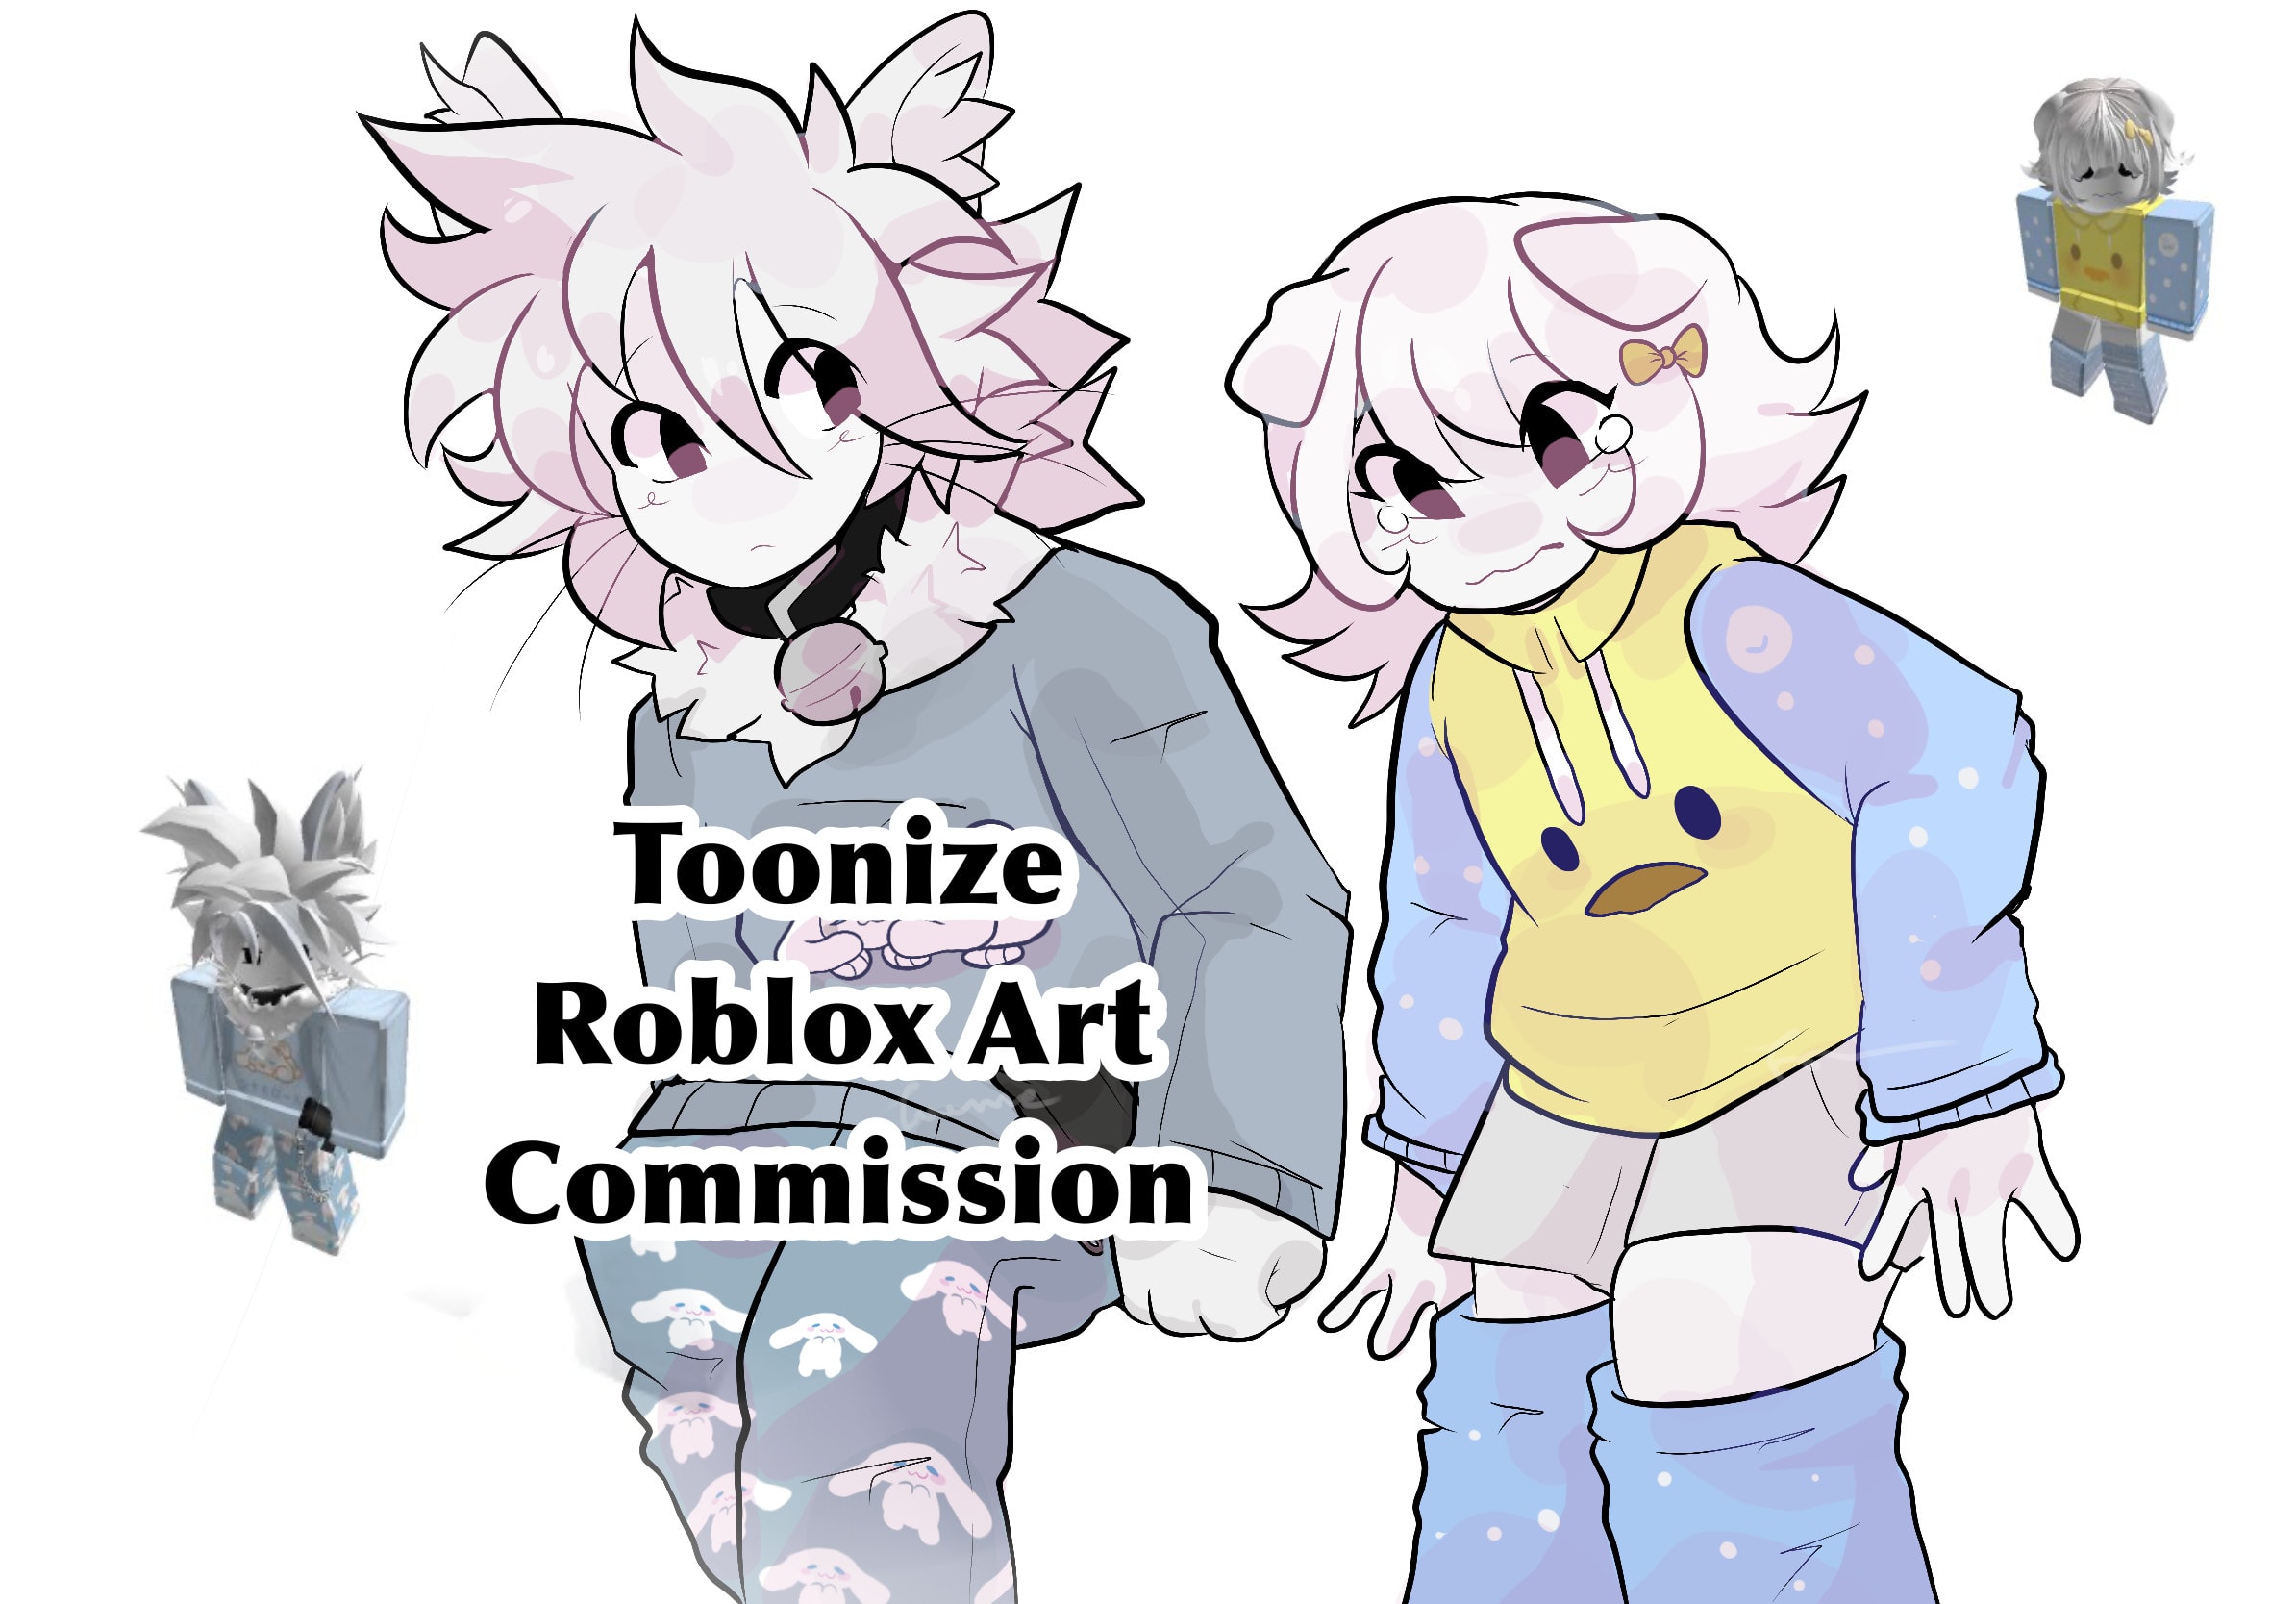 comms open because i have 1 robux : r/RobloxArt